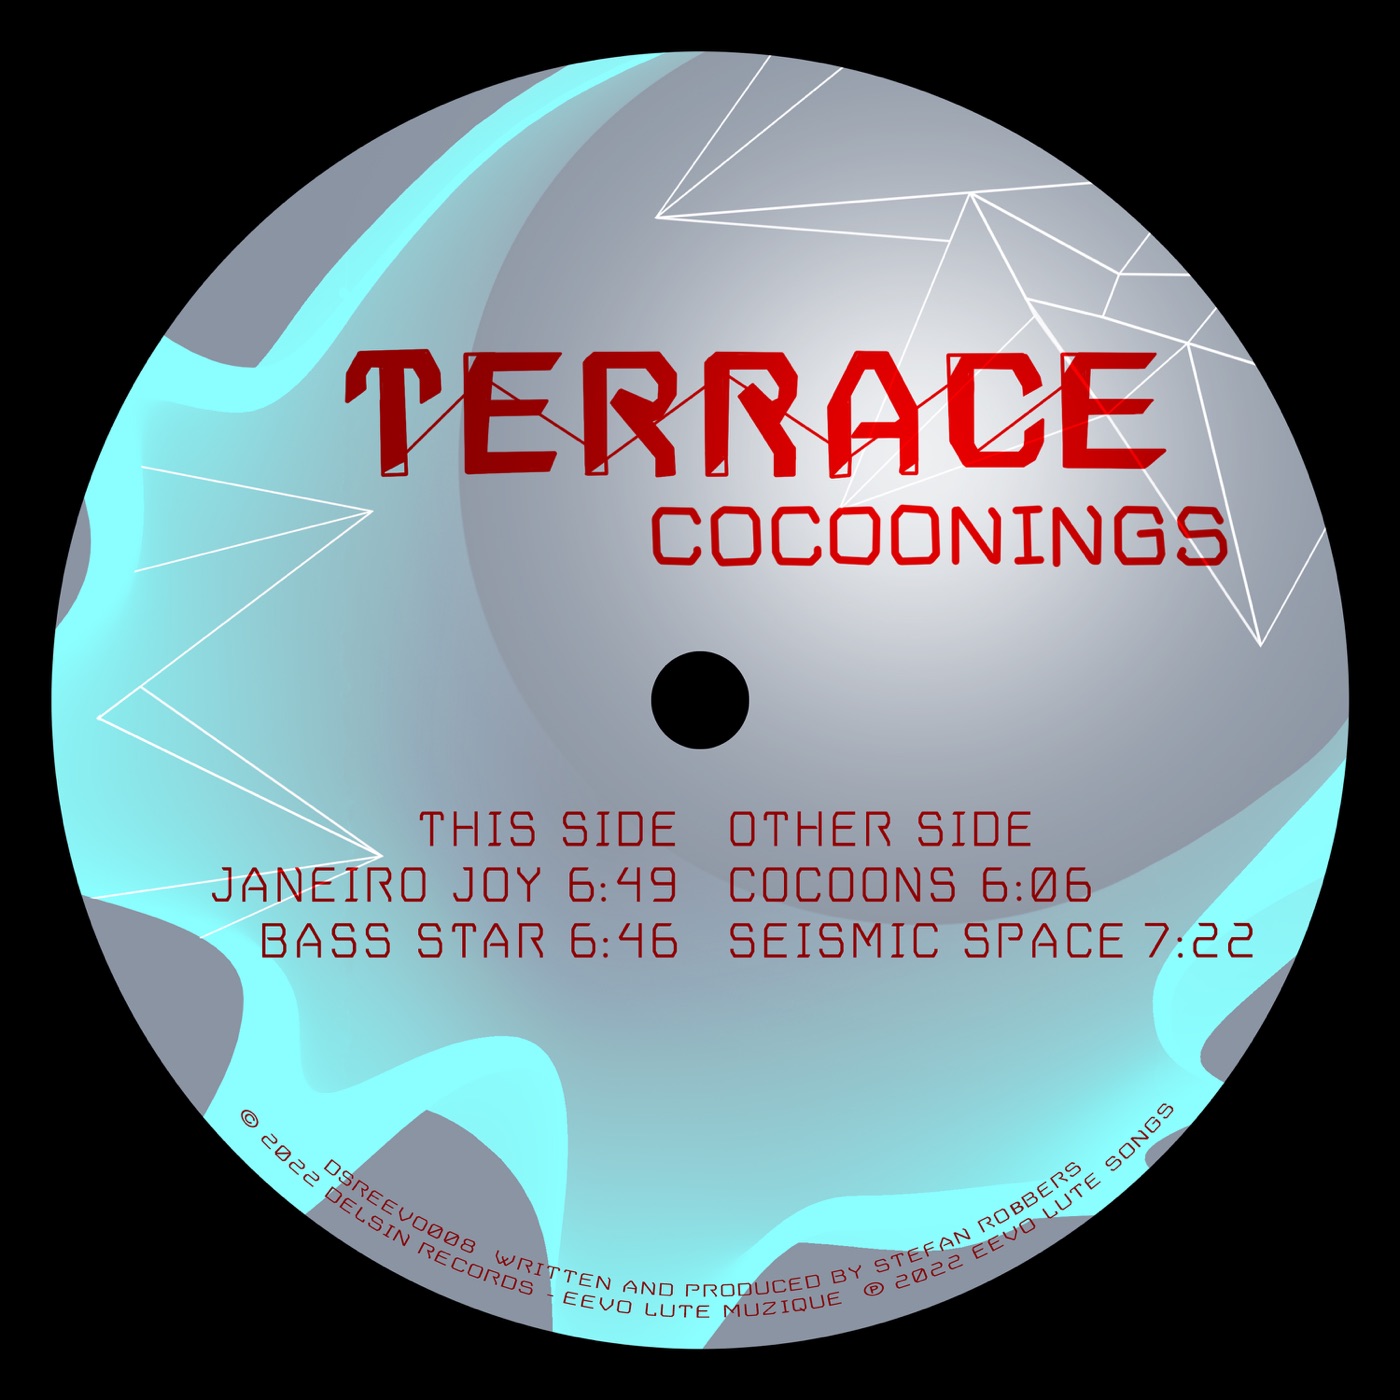 Cocoonings by Terrace